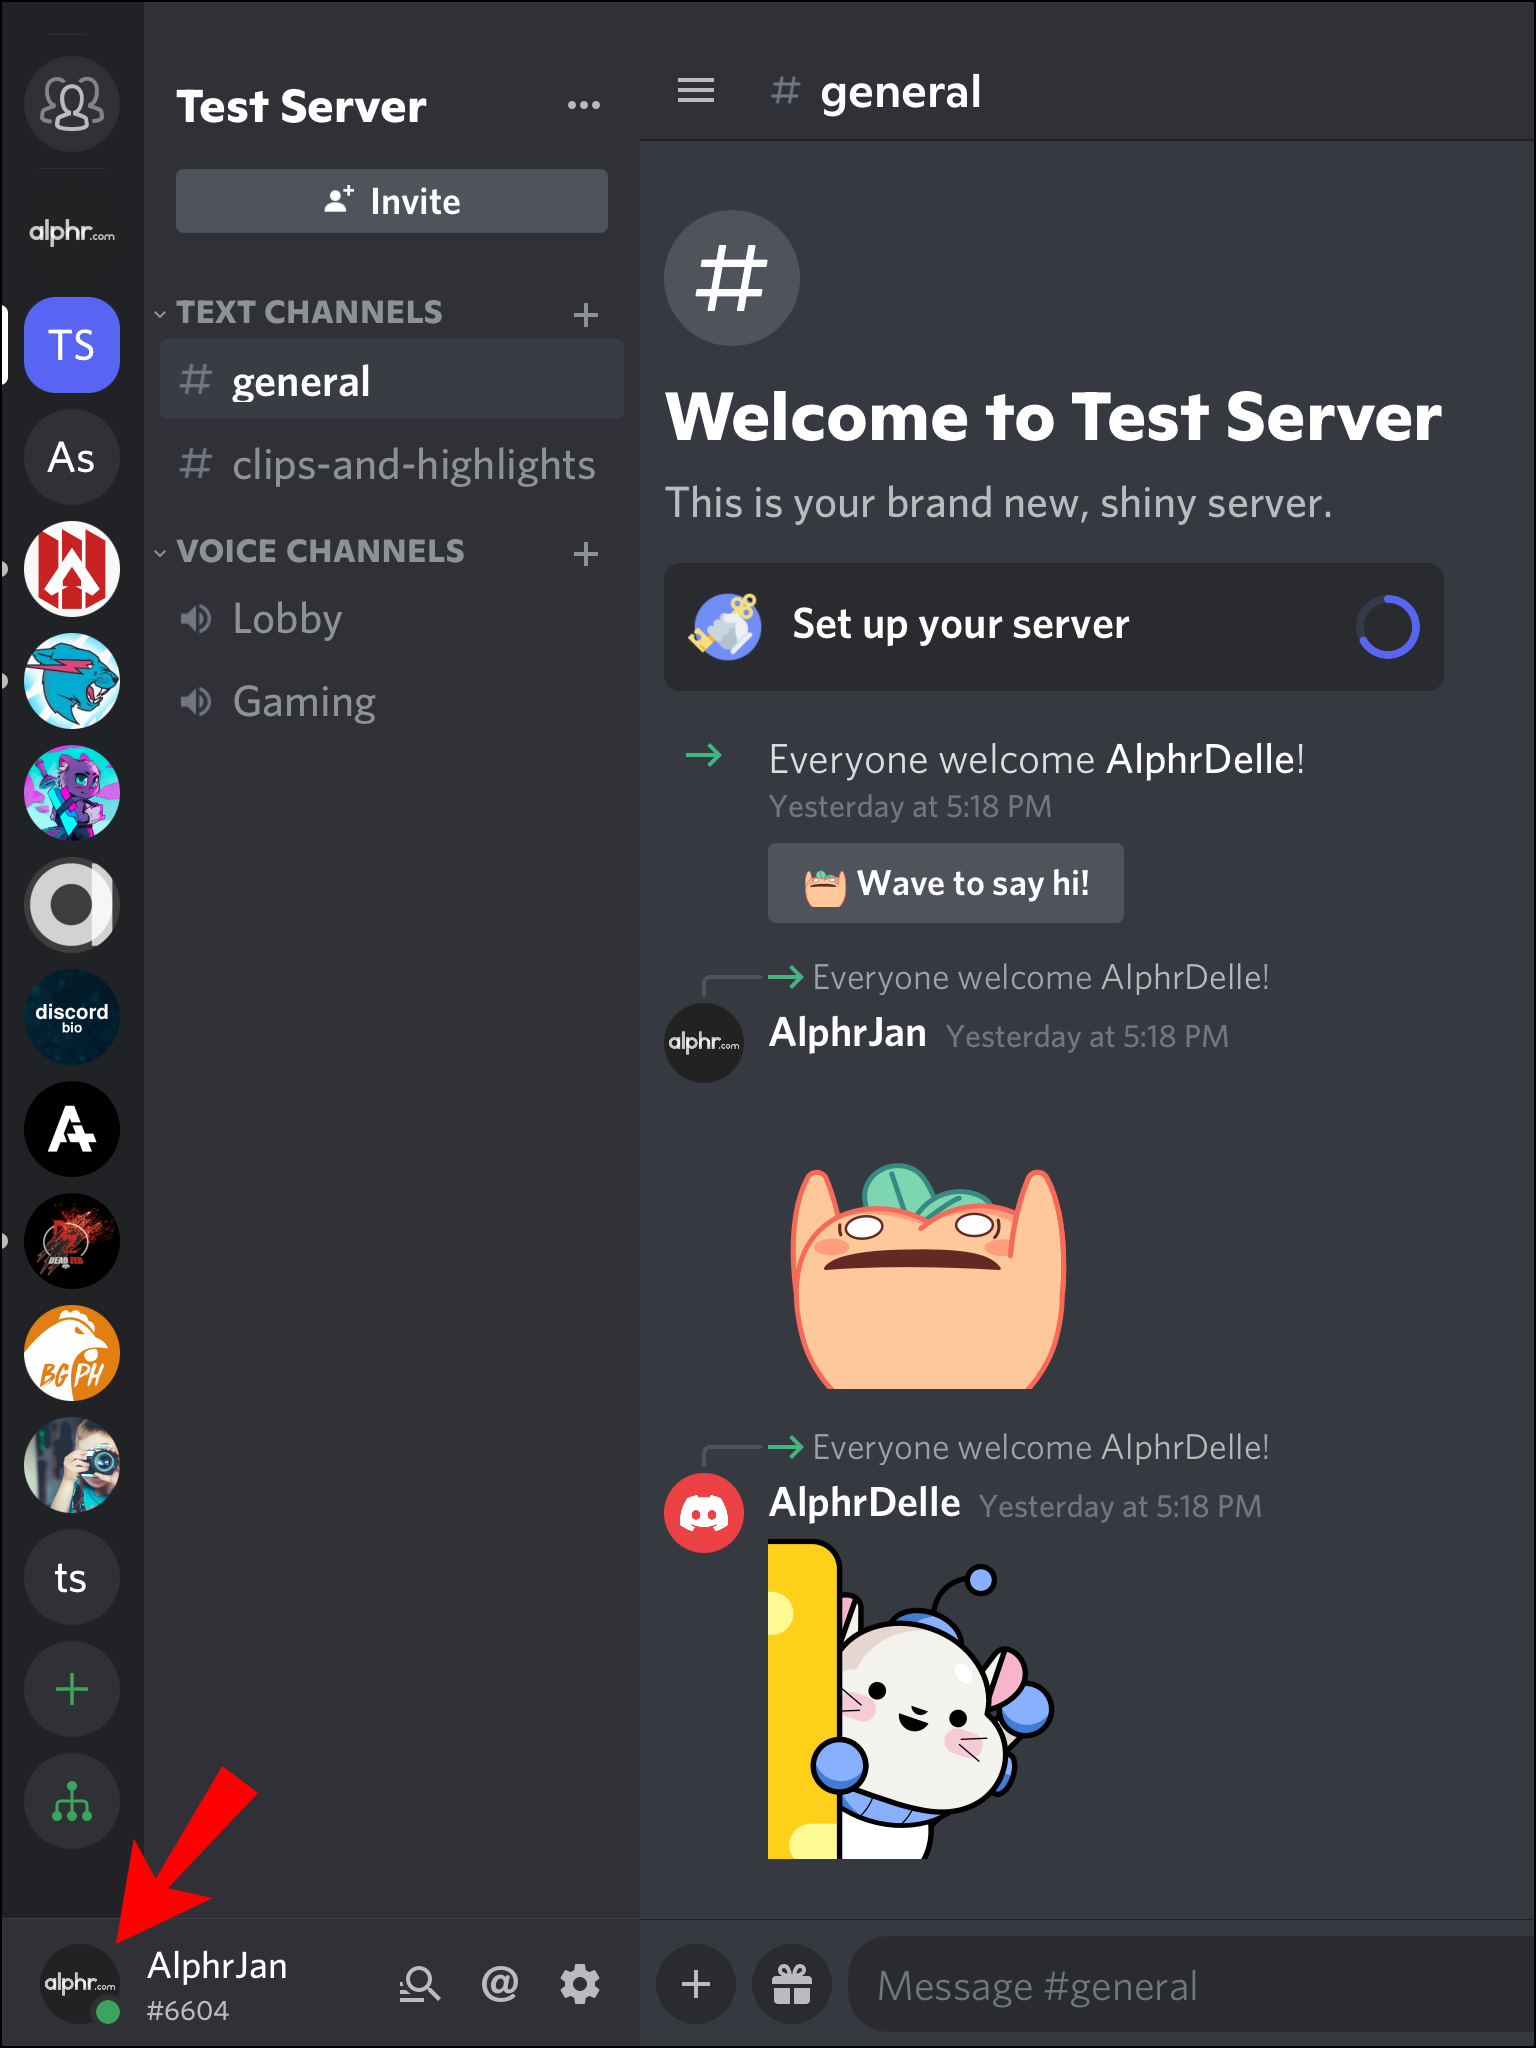 Go join my discord server in my bio so I can see and support your best